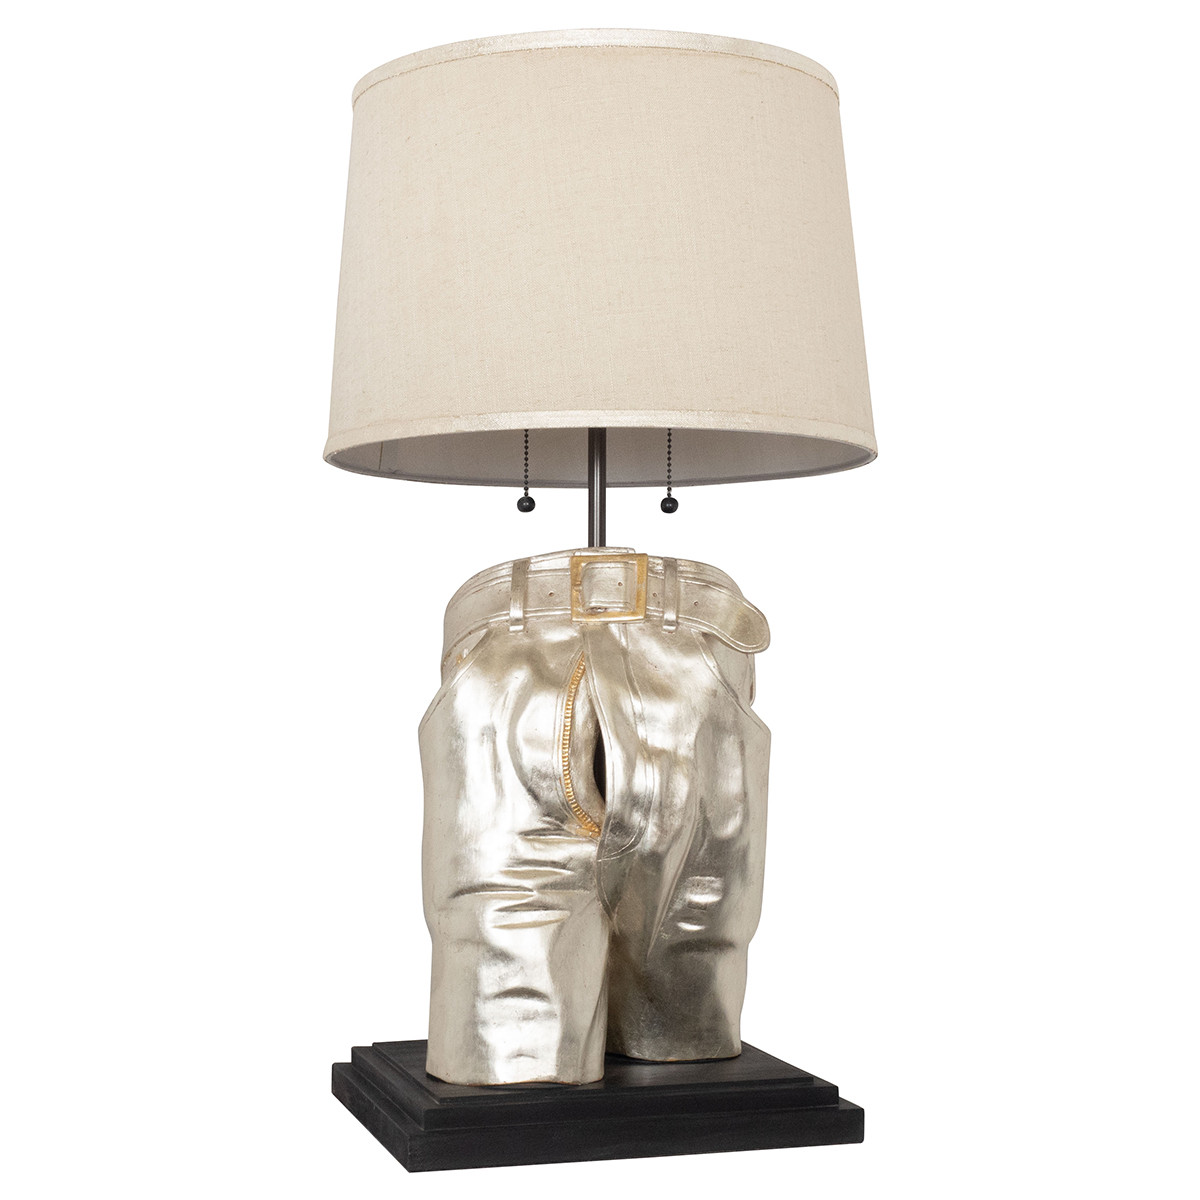 Giltwood sculptural "jeans" table lamp by Carlos Villegas